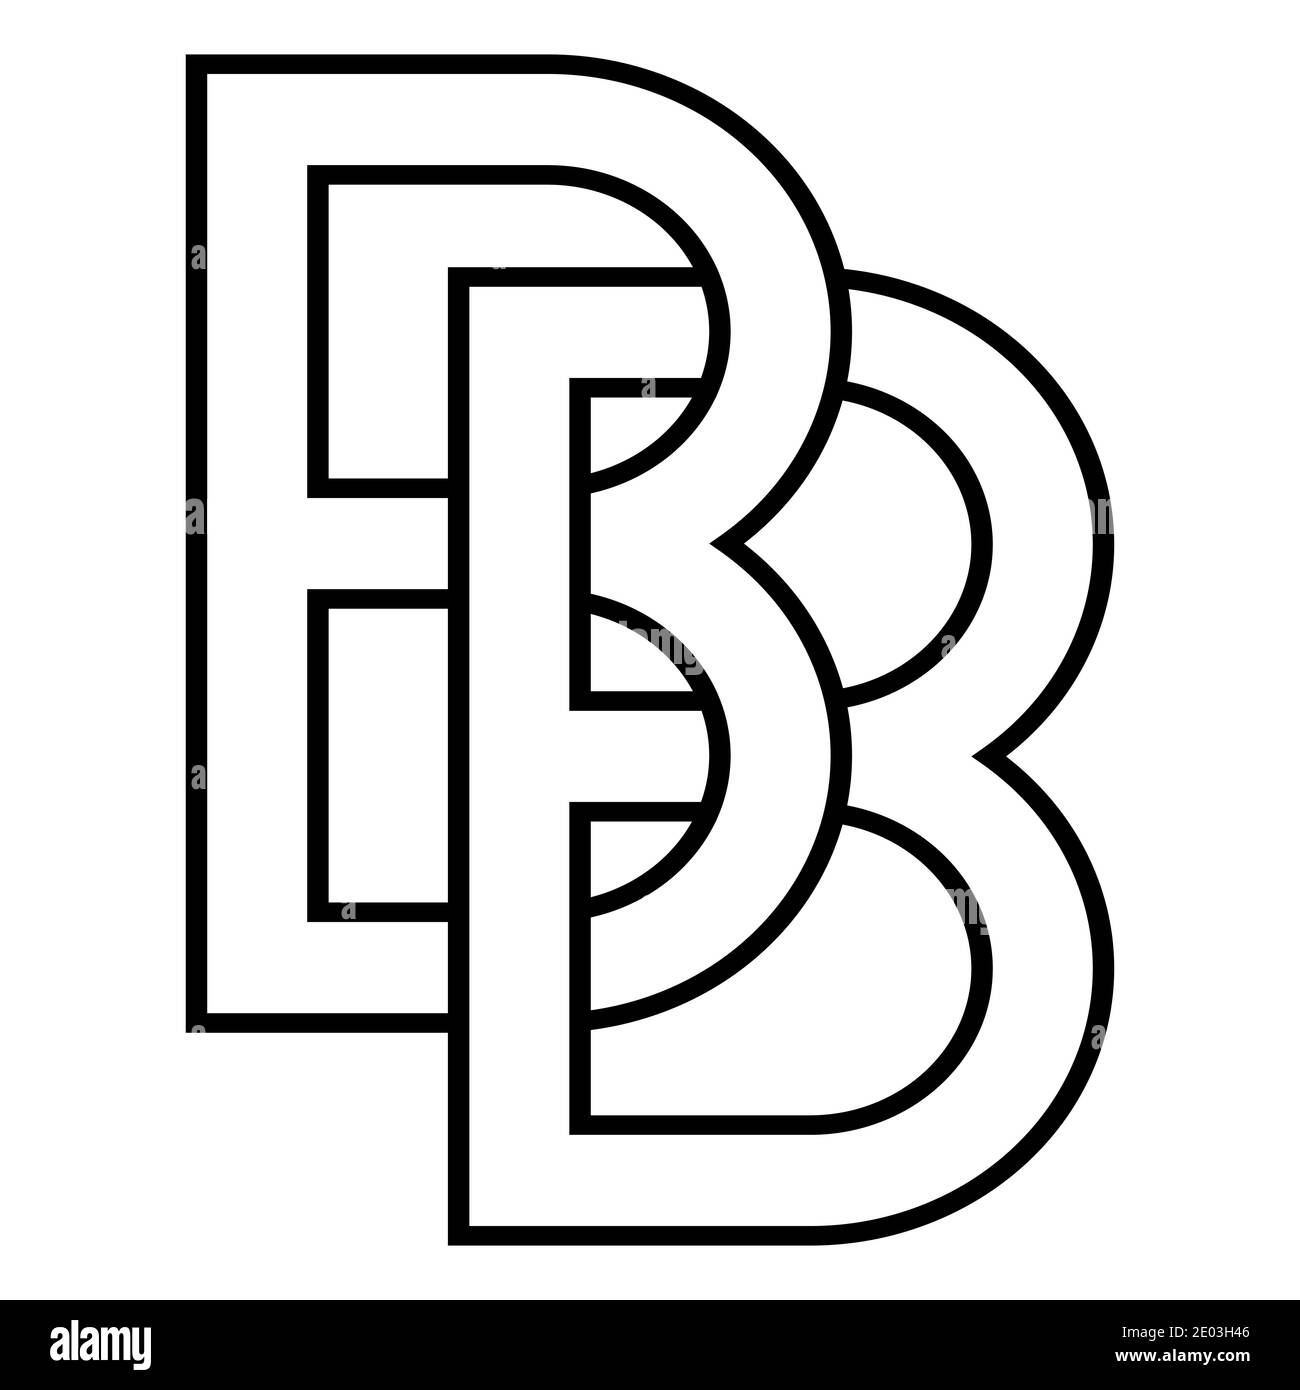 Logo sign bb and 2 b icon sign two interlaced letters b vector logo bb, first capital letters pattern alphabet b Stock Vector